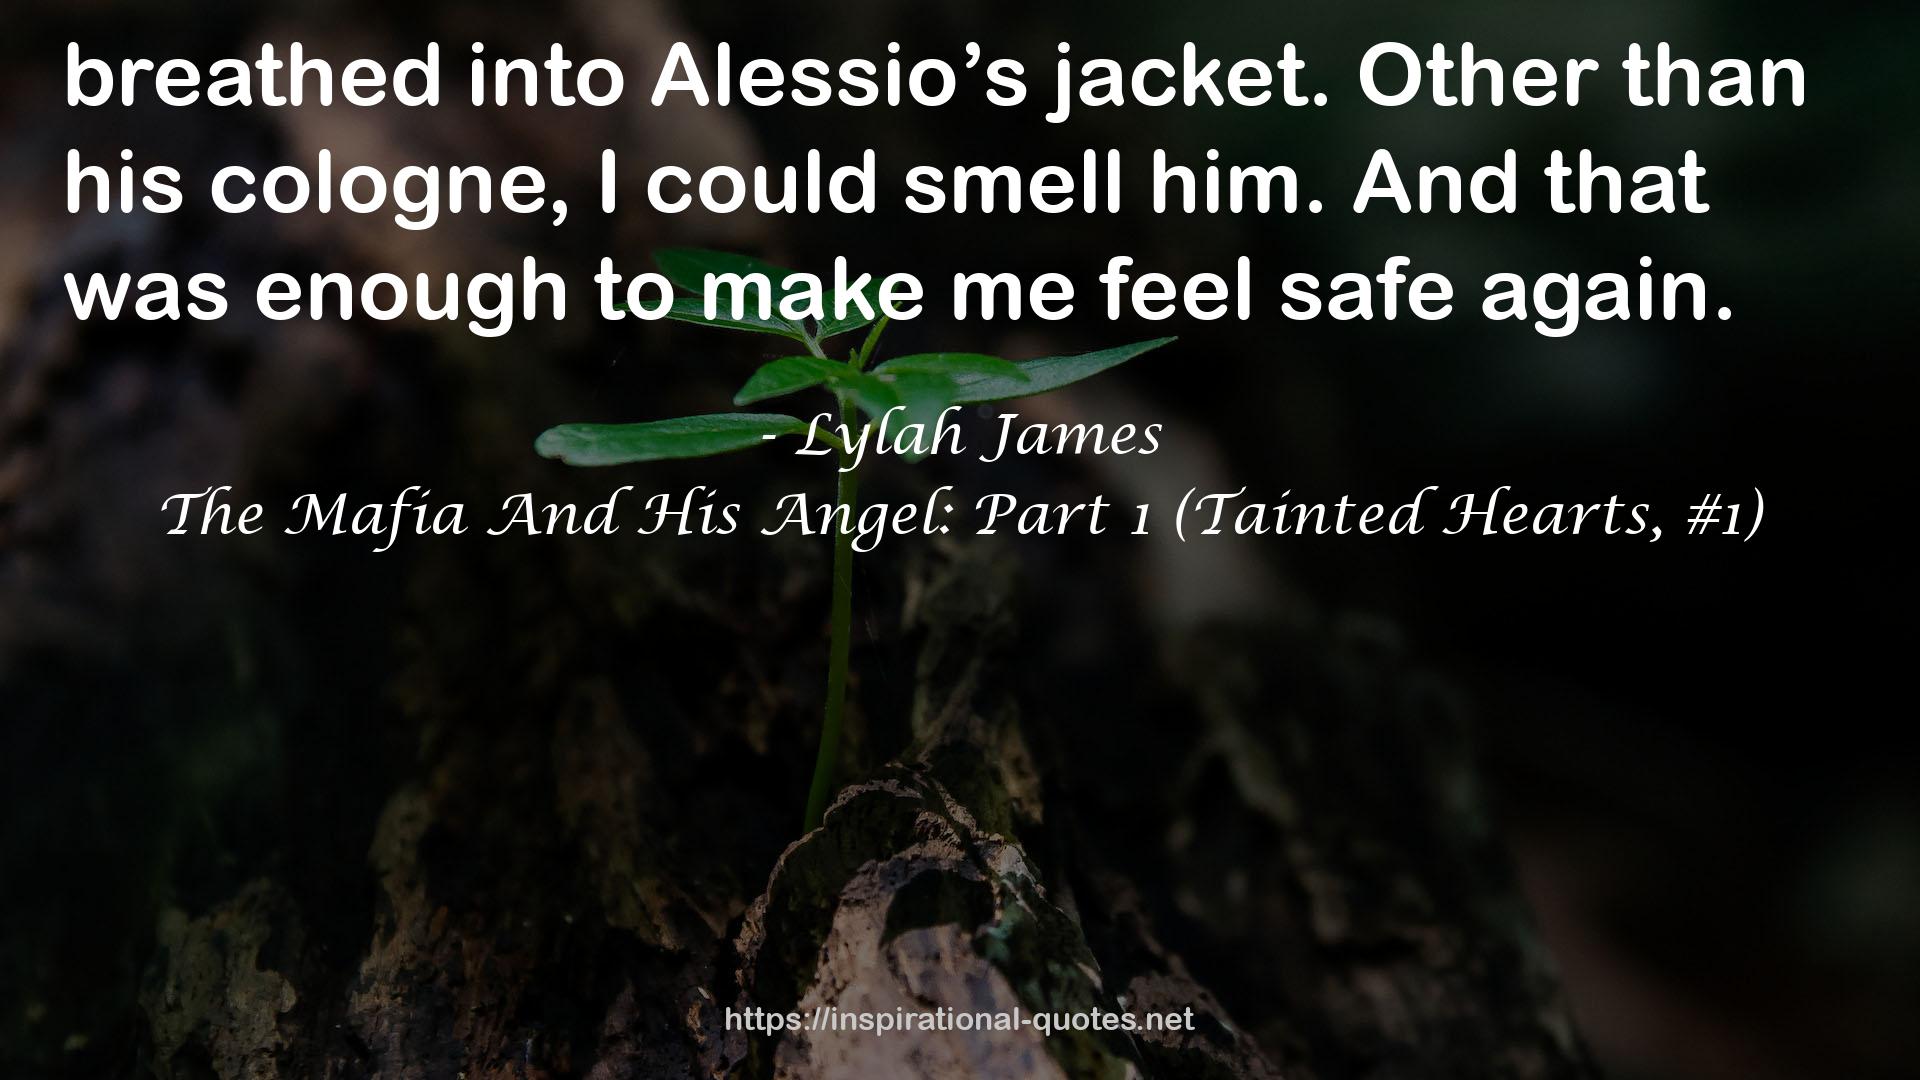 The Mafia And His Angel: Part 1 (Tainted Hearts, #1) QUOTES